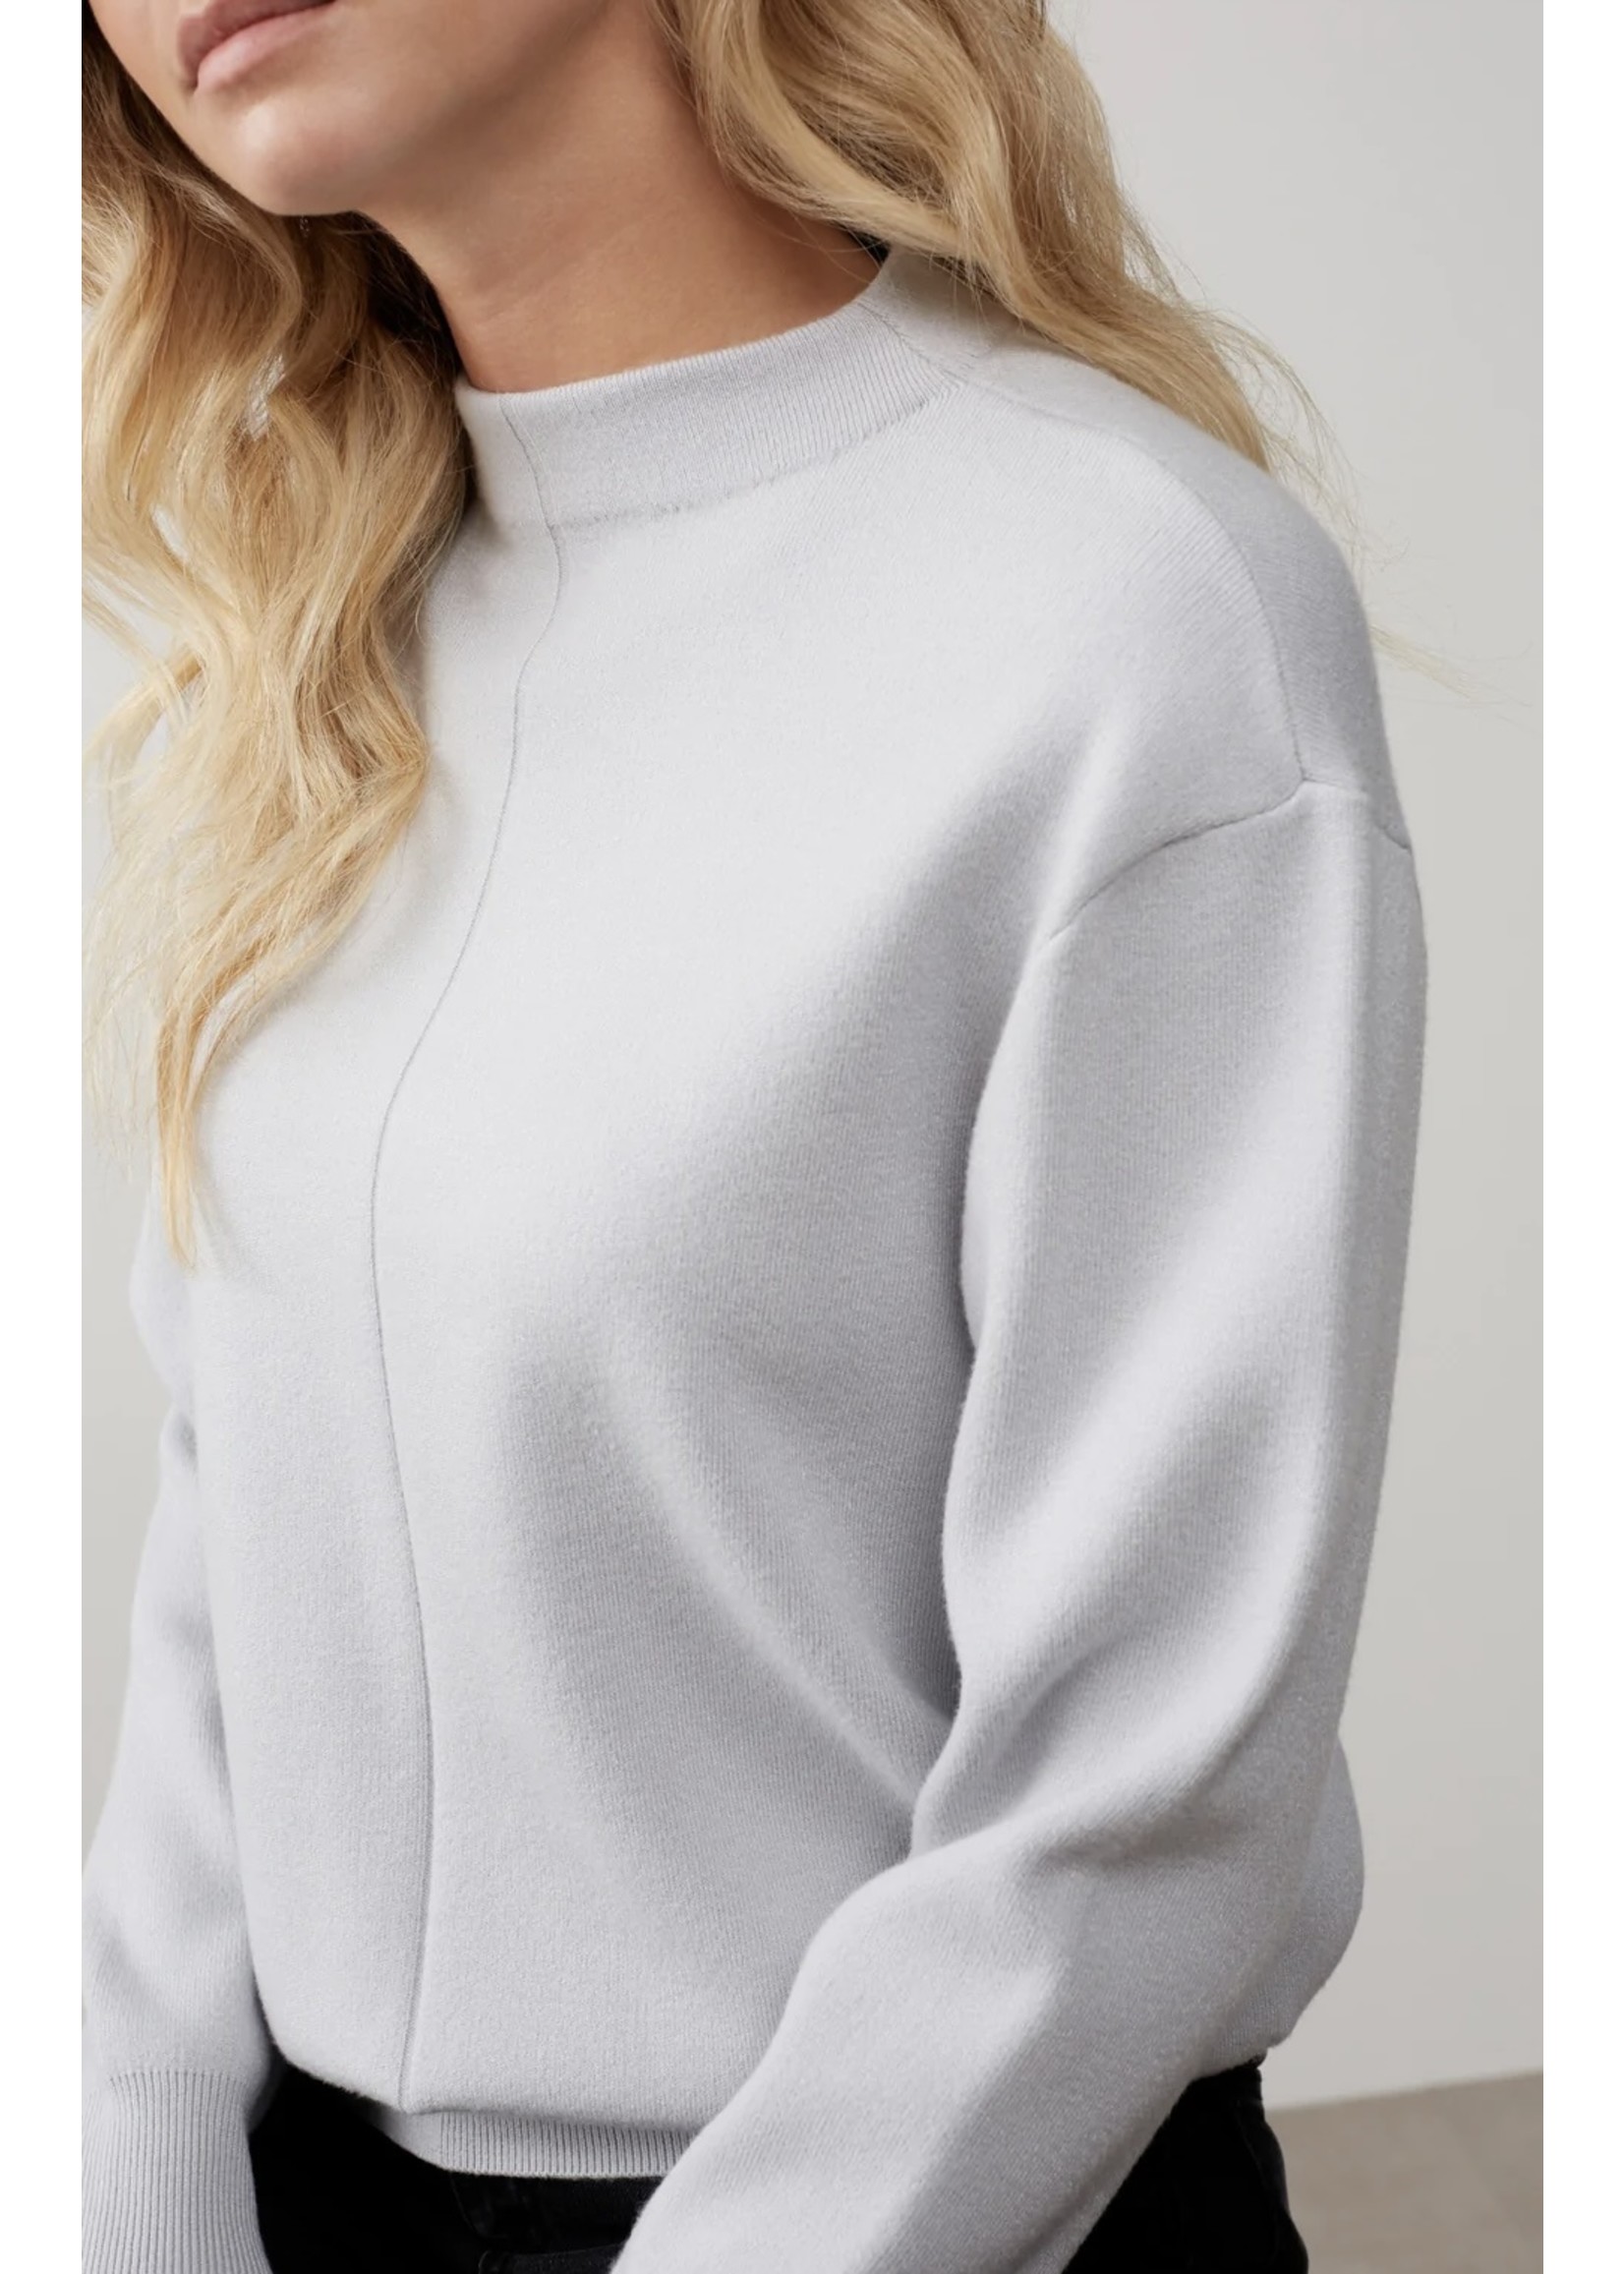 YAYA Yaya - Sweater with stand up neckline and seam at centre front